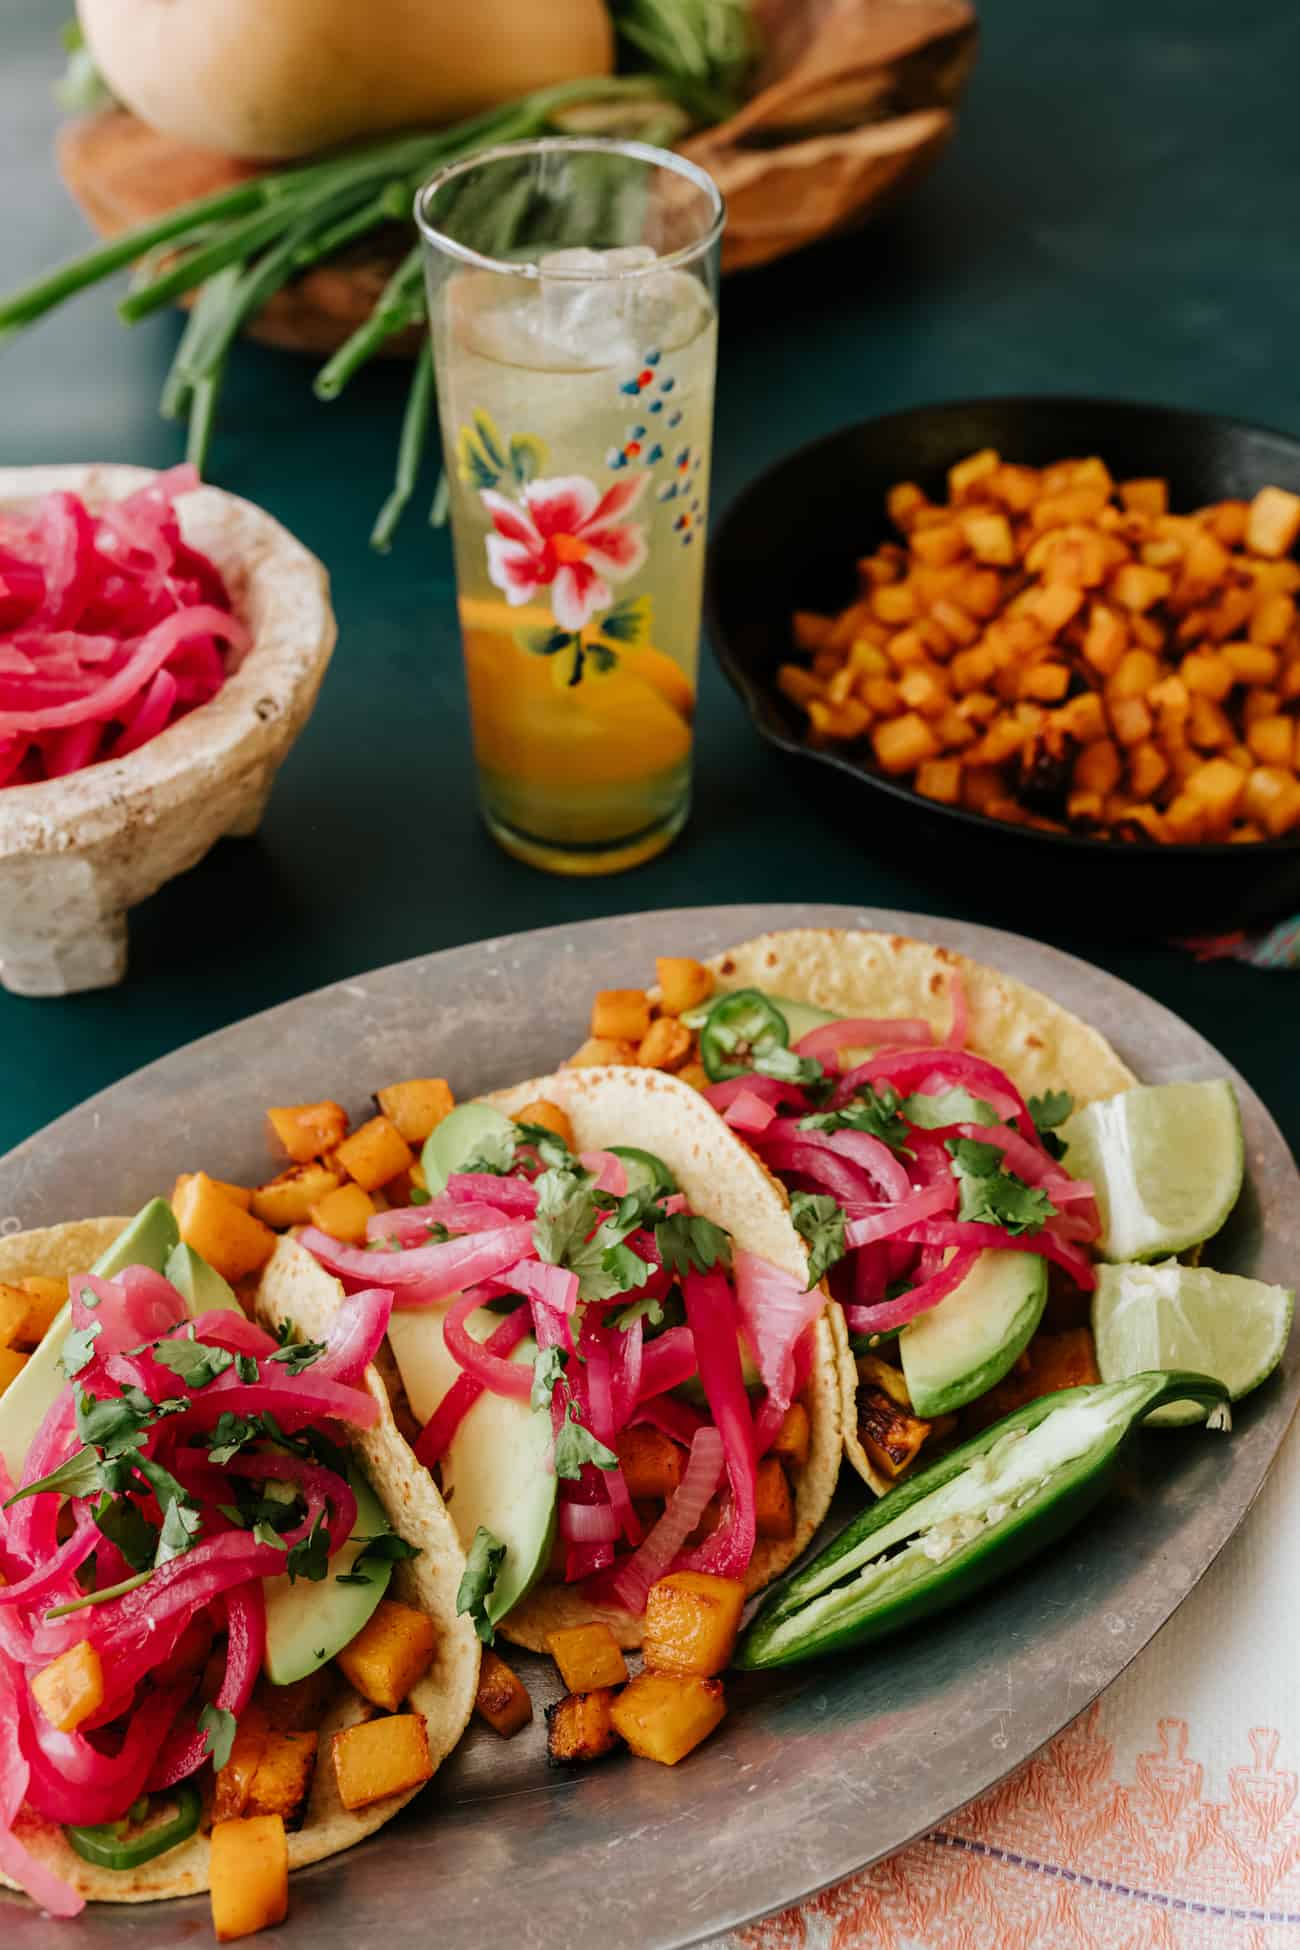 silver serving platter with three roasted butternut squash tacos topped with pickled red onions on a table with a floral painted glass filled with an orange soda water spritz.